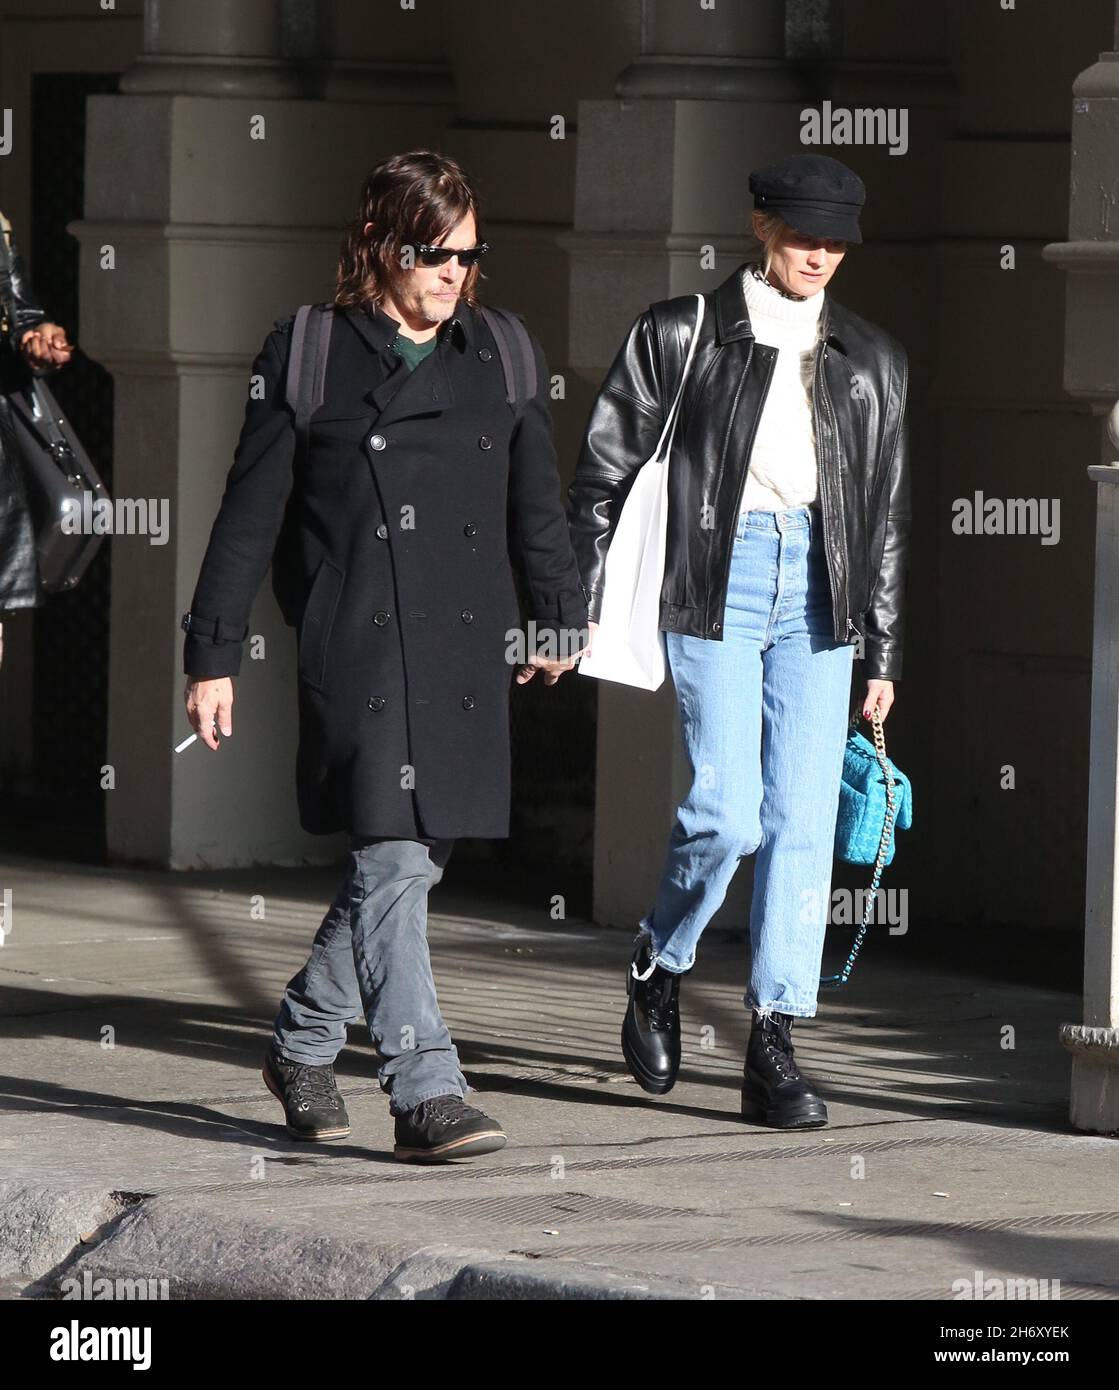 Diane Kruger & Norman Reedus Go Post-Christmas Shopping Together in NYC:  Photo 4406847, Diane Kruger, Norman Reedus Photos